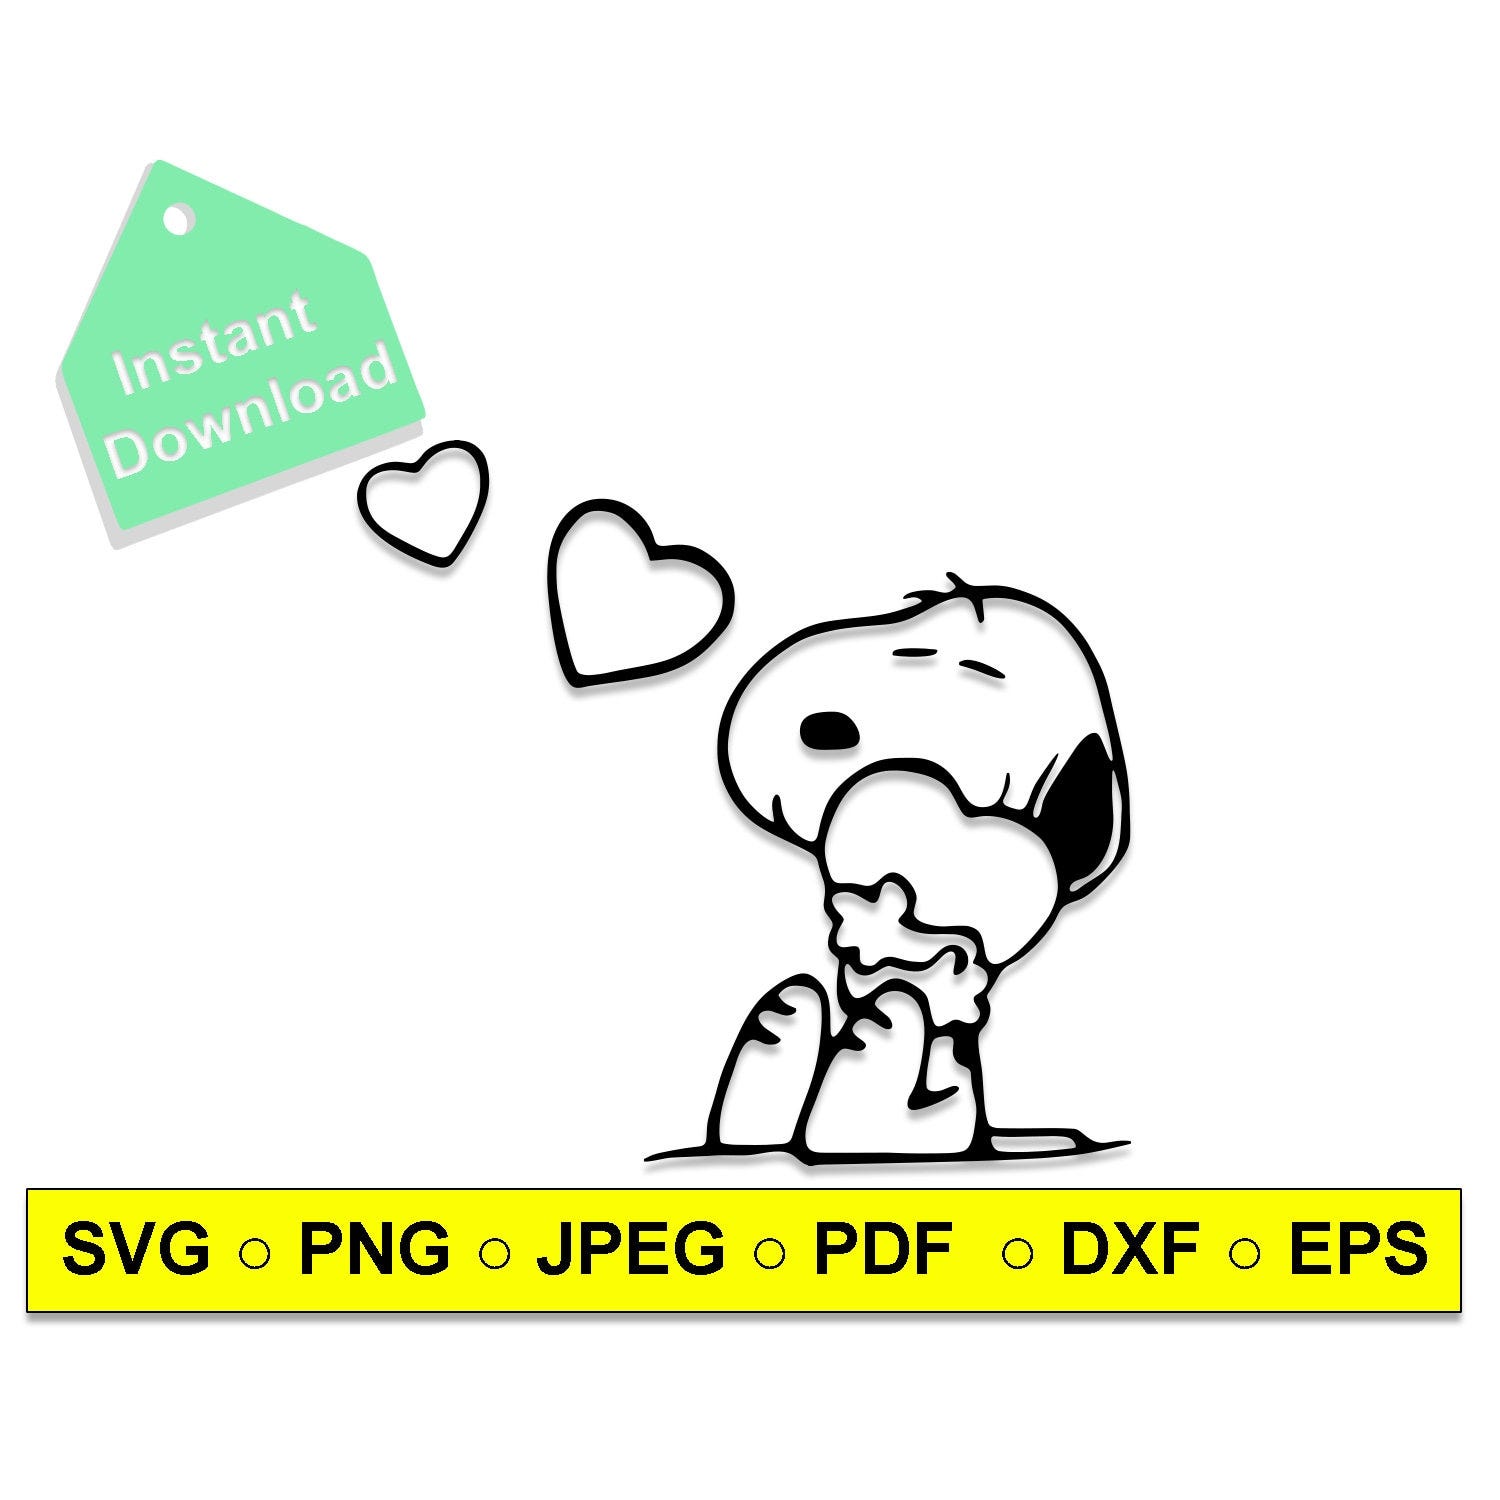 Snoopy Svg,Cute snoopy, SVG file, EPS file, png file, JPG, Instant Download, Cricut Cut File, Silhouette Cameo,Heart and Snoopy,Fall in love